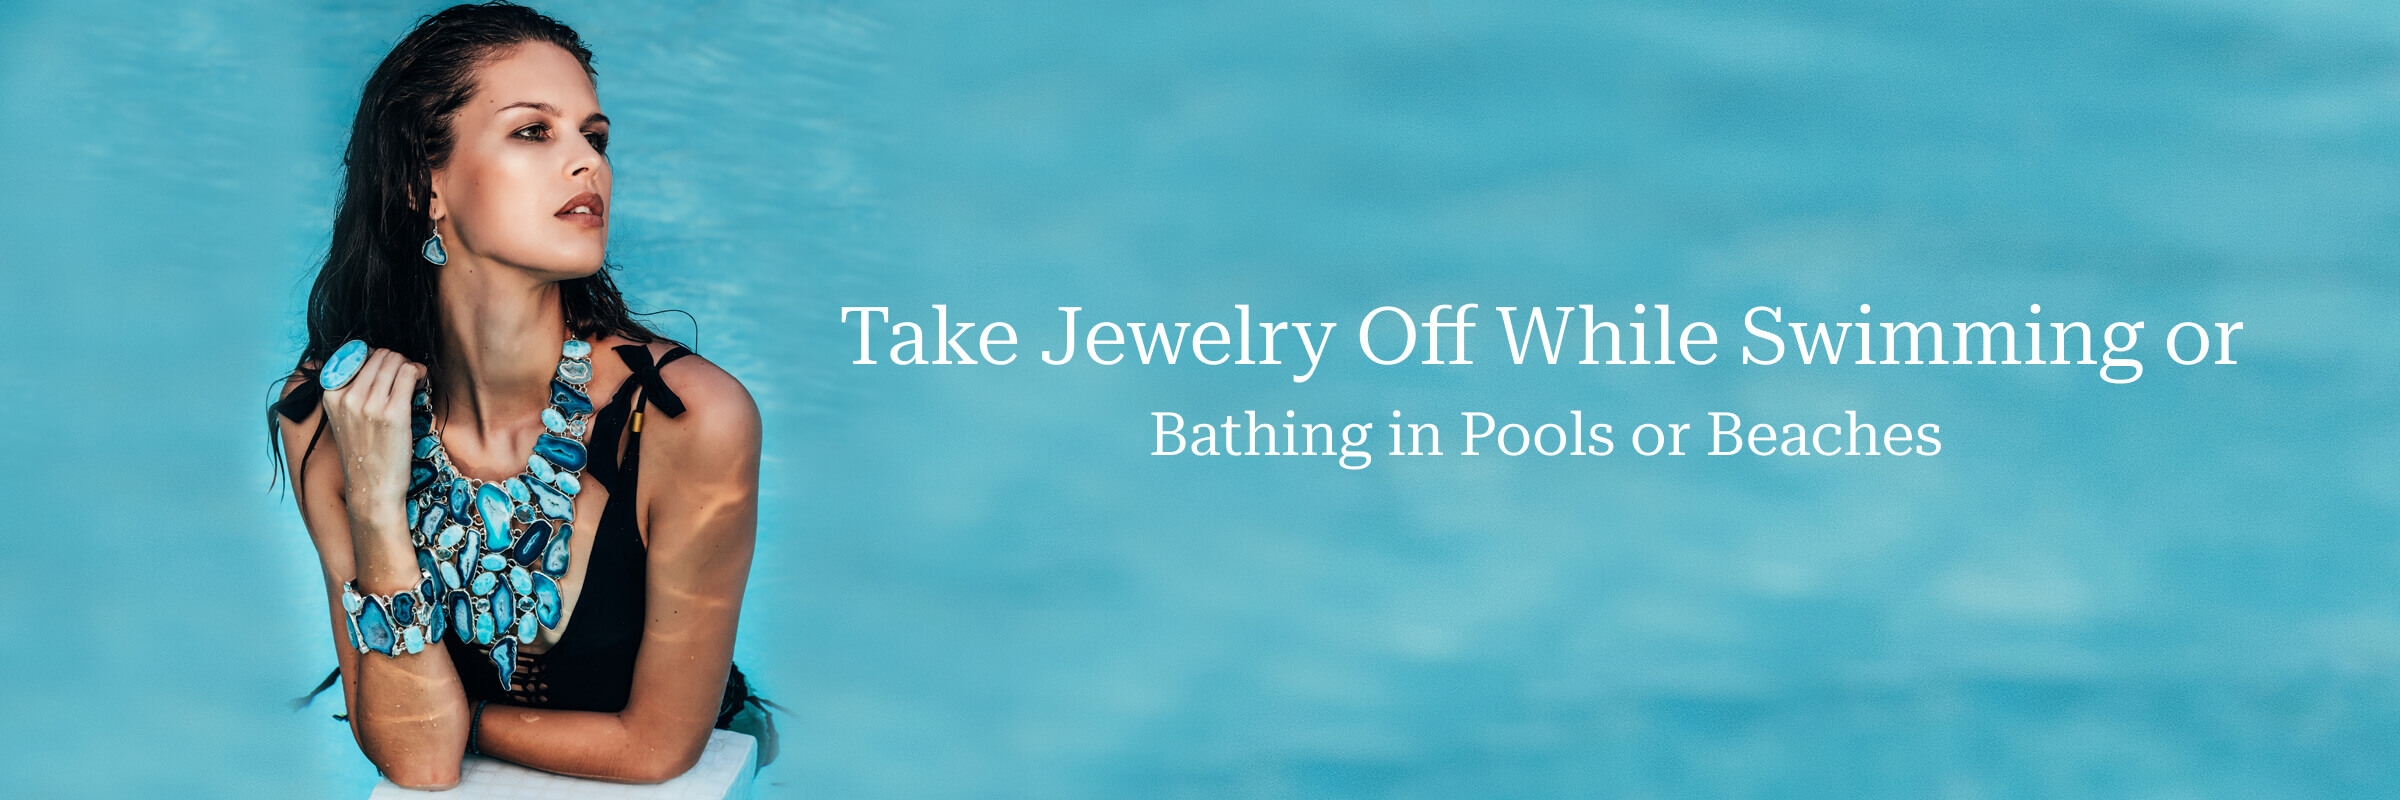 Take Jewelry Off While Swimming or Bathing in Pools or Beaches